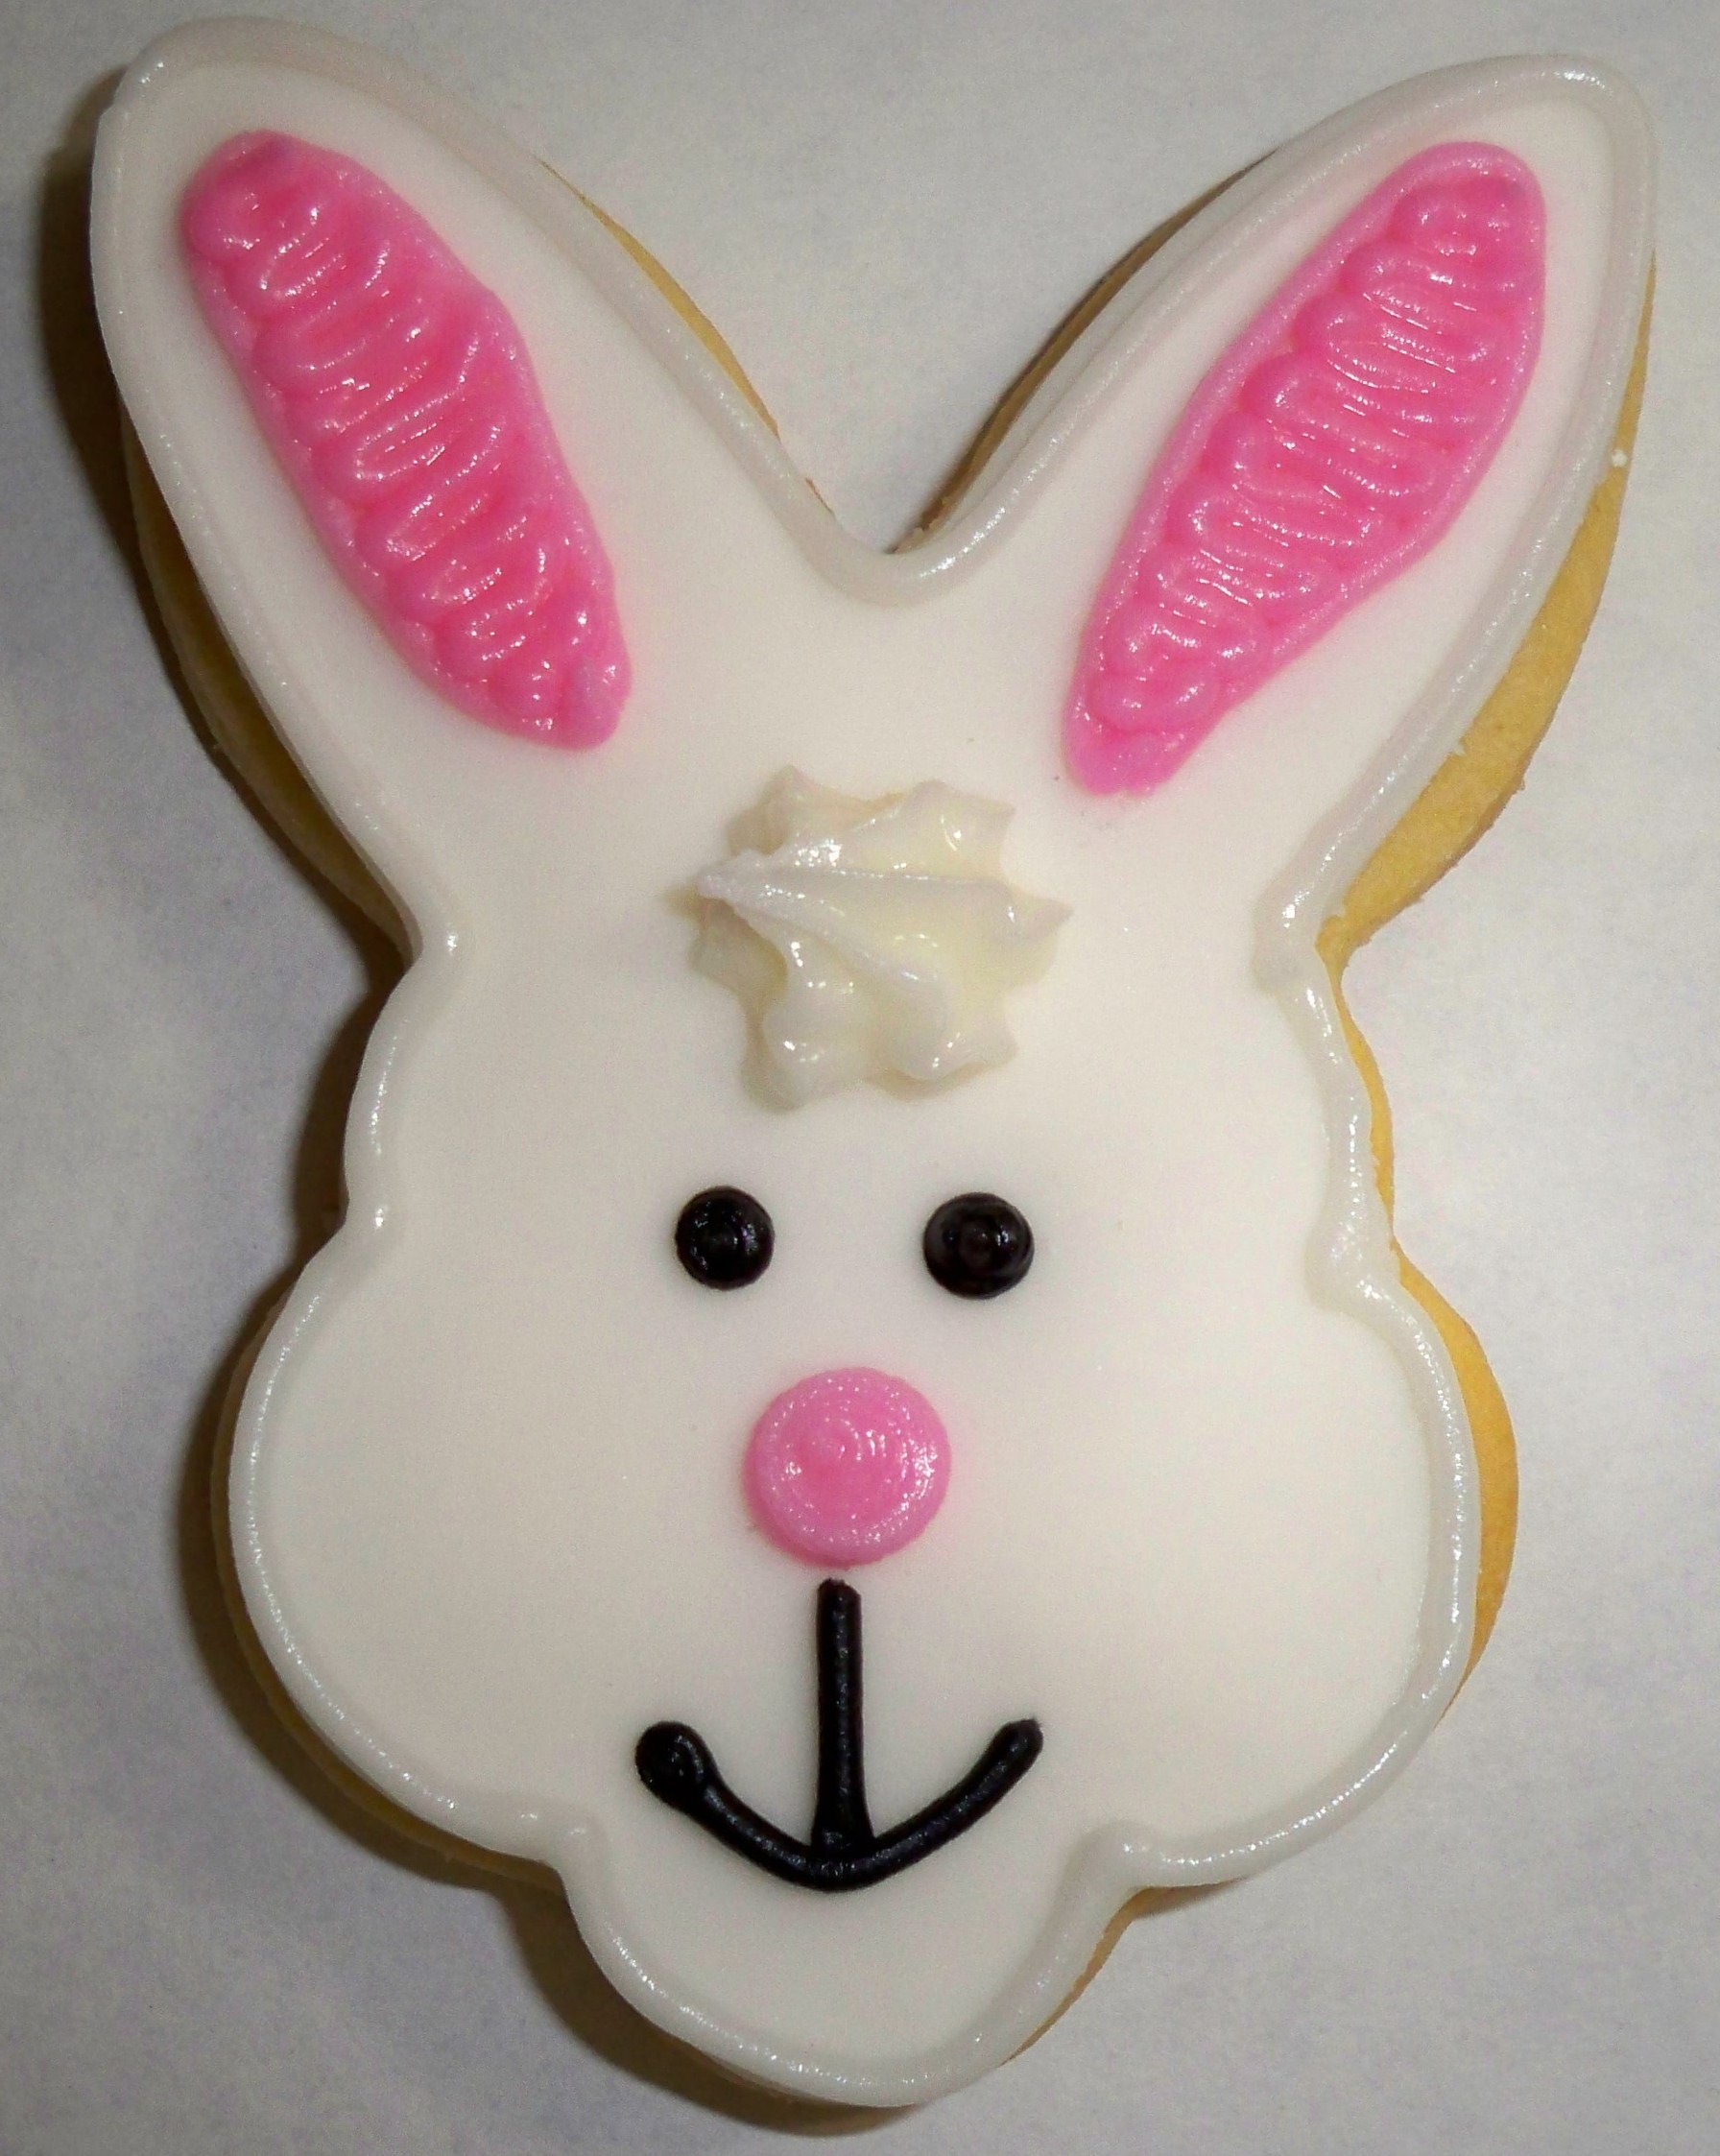 (4)Easter Bunny
